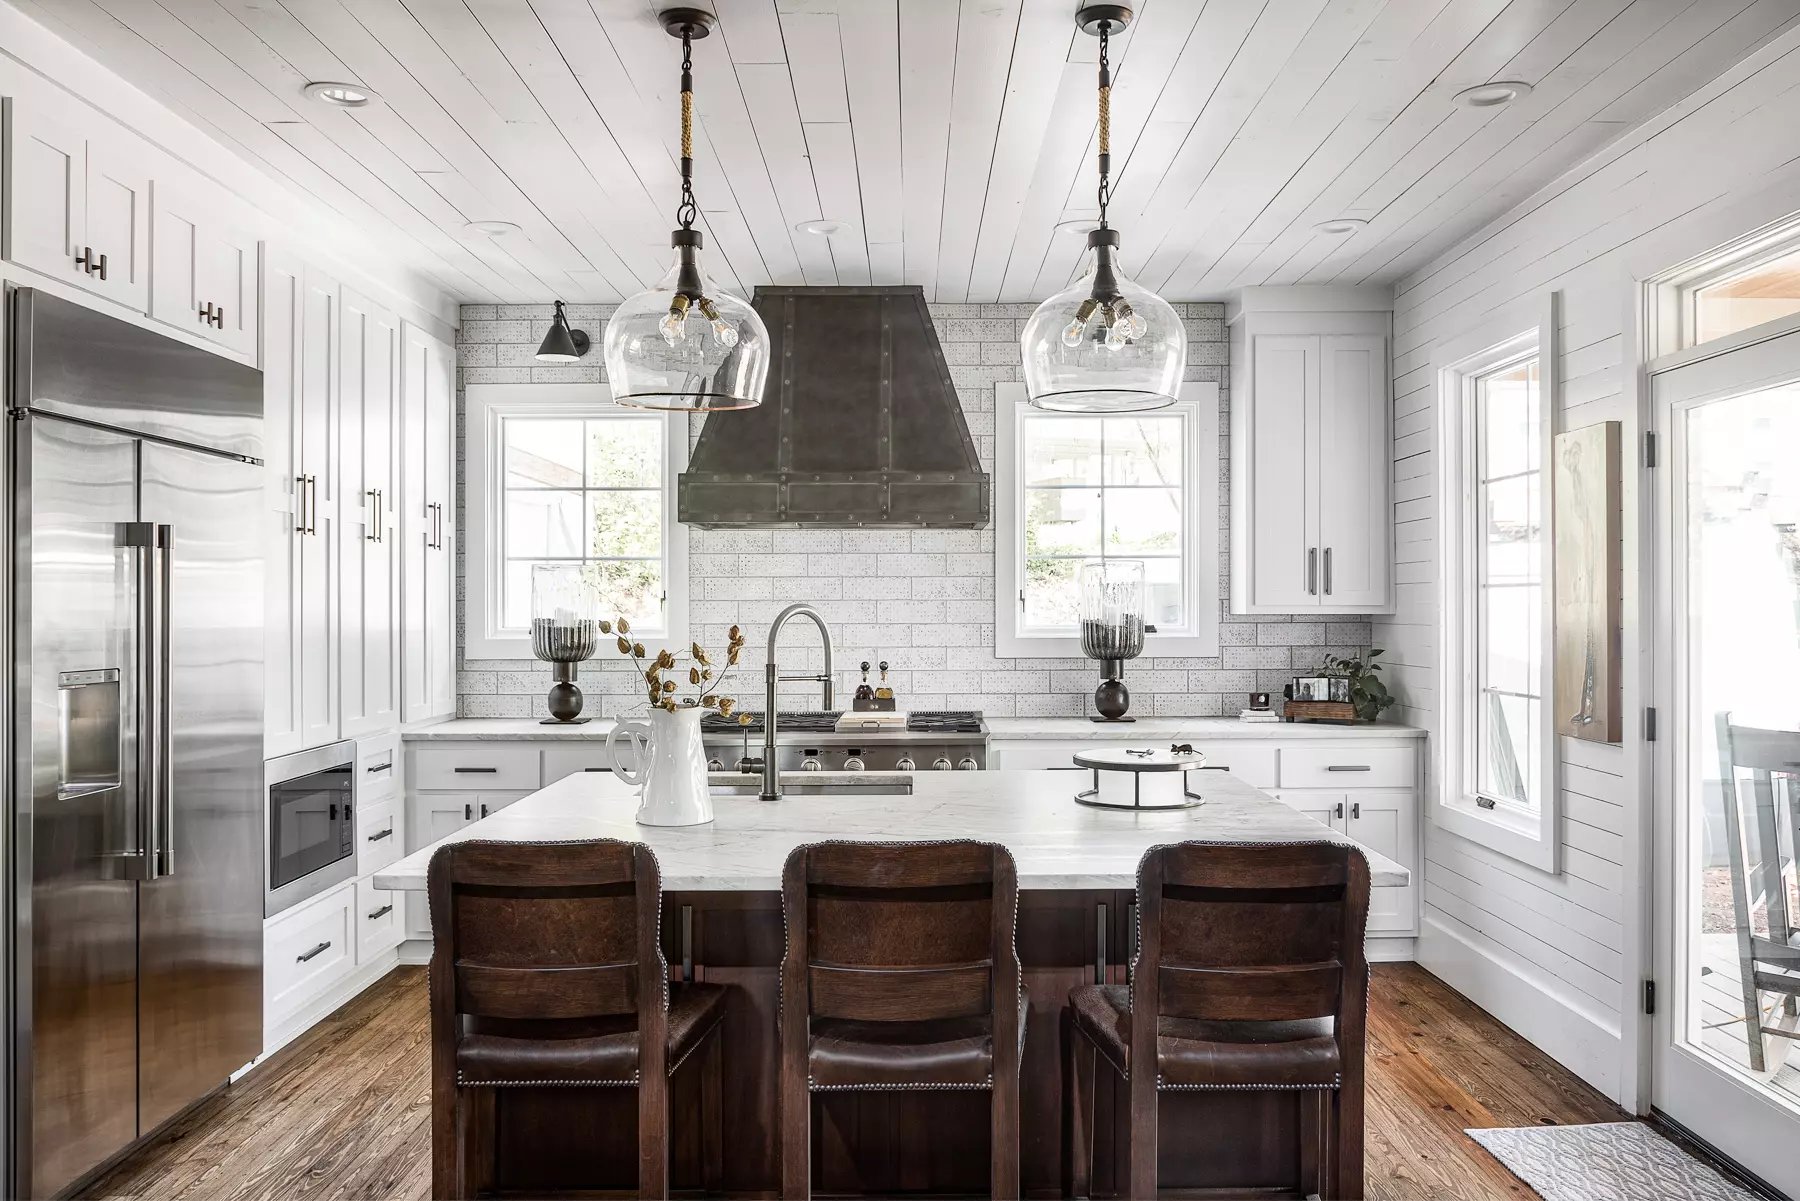 Bright farmhouse kitchen with shiplap walls, subway tiles, and statement lighting over the island.